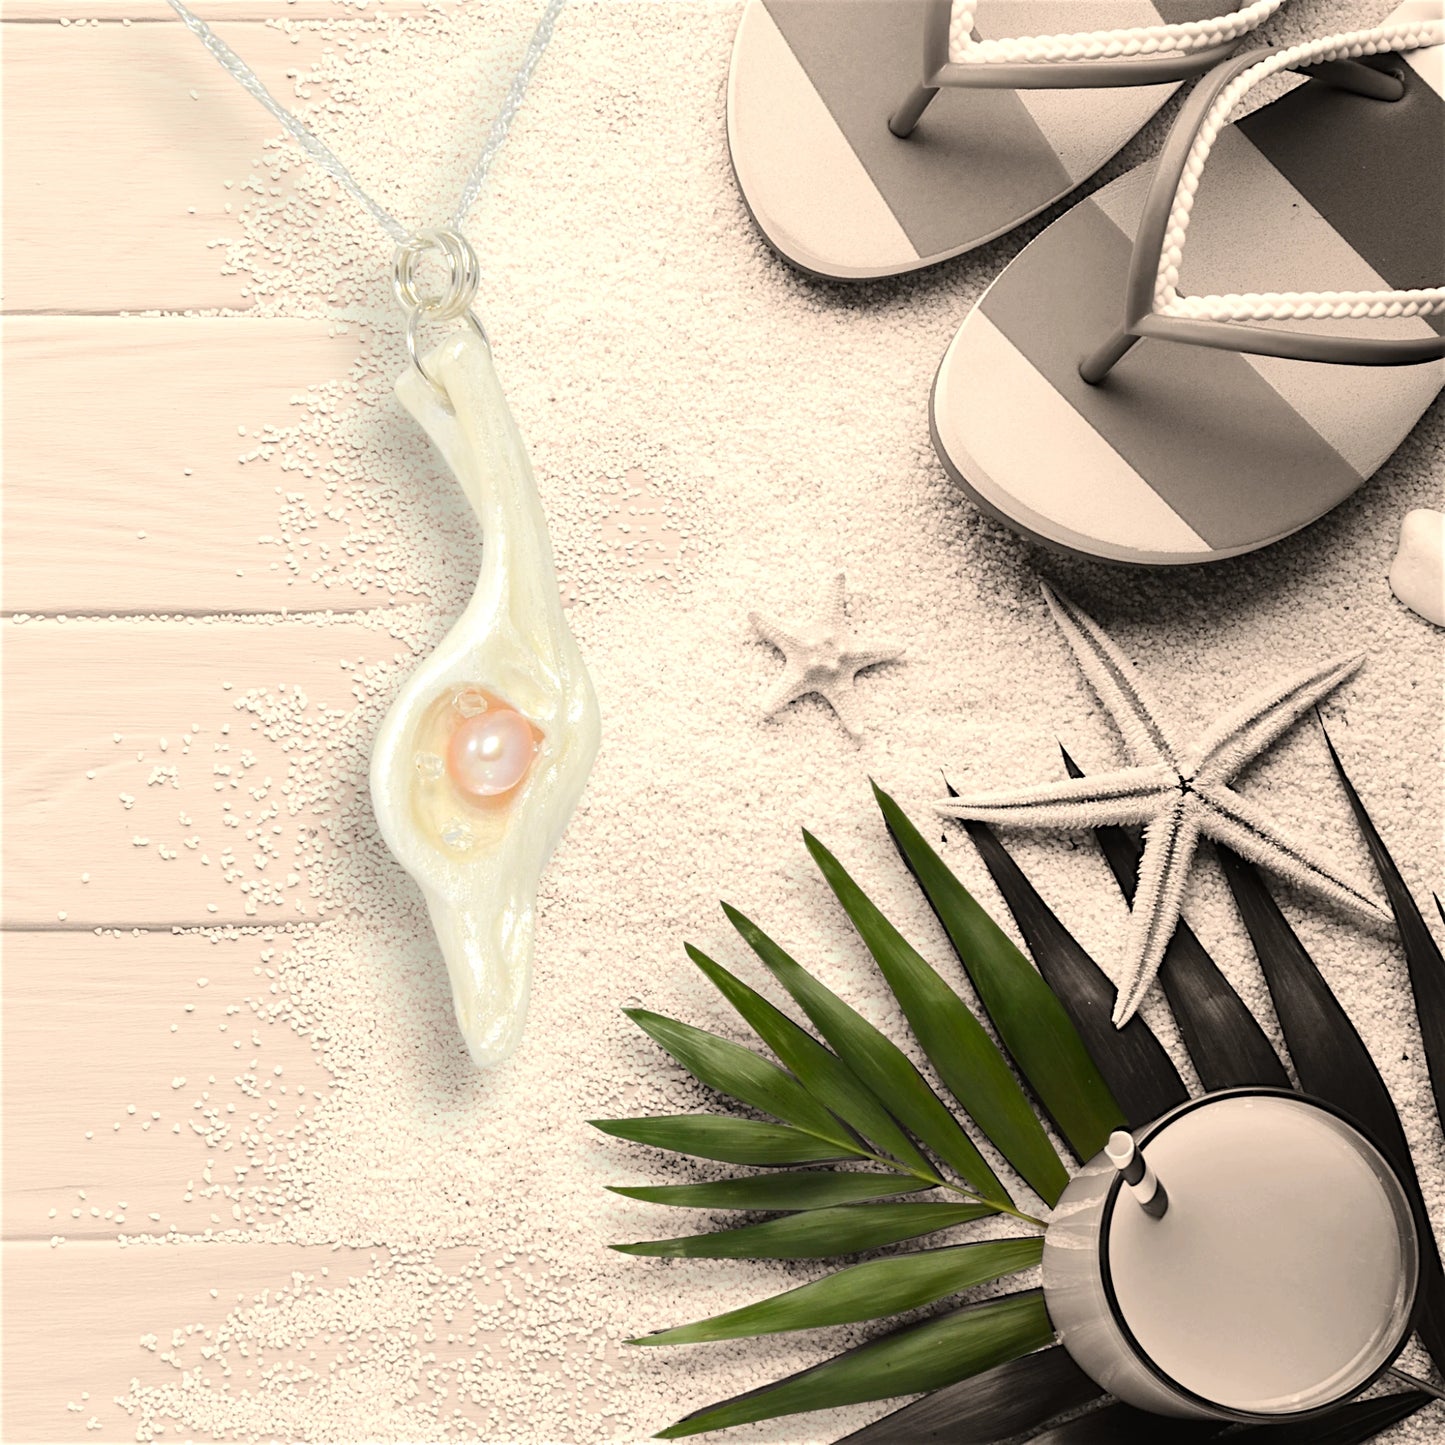 The pendant champagne on ice compliments any season but especially the summer!  The pendant is shown on a deck floor with sand, starfish, sandals and a summer refreshment.